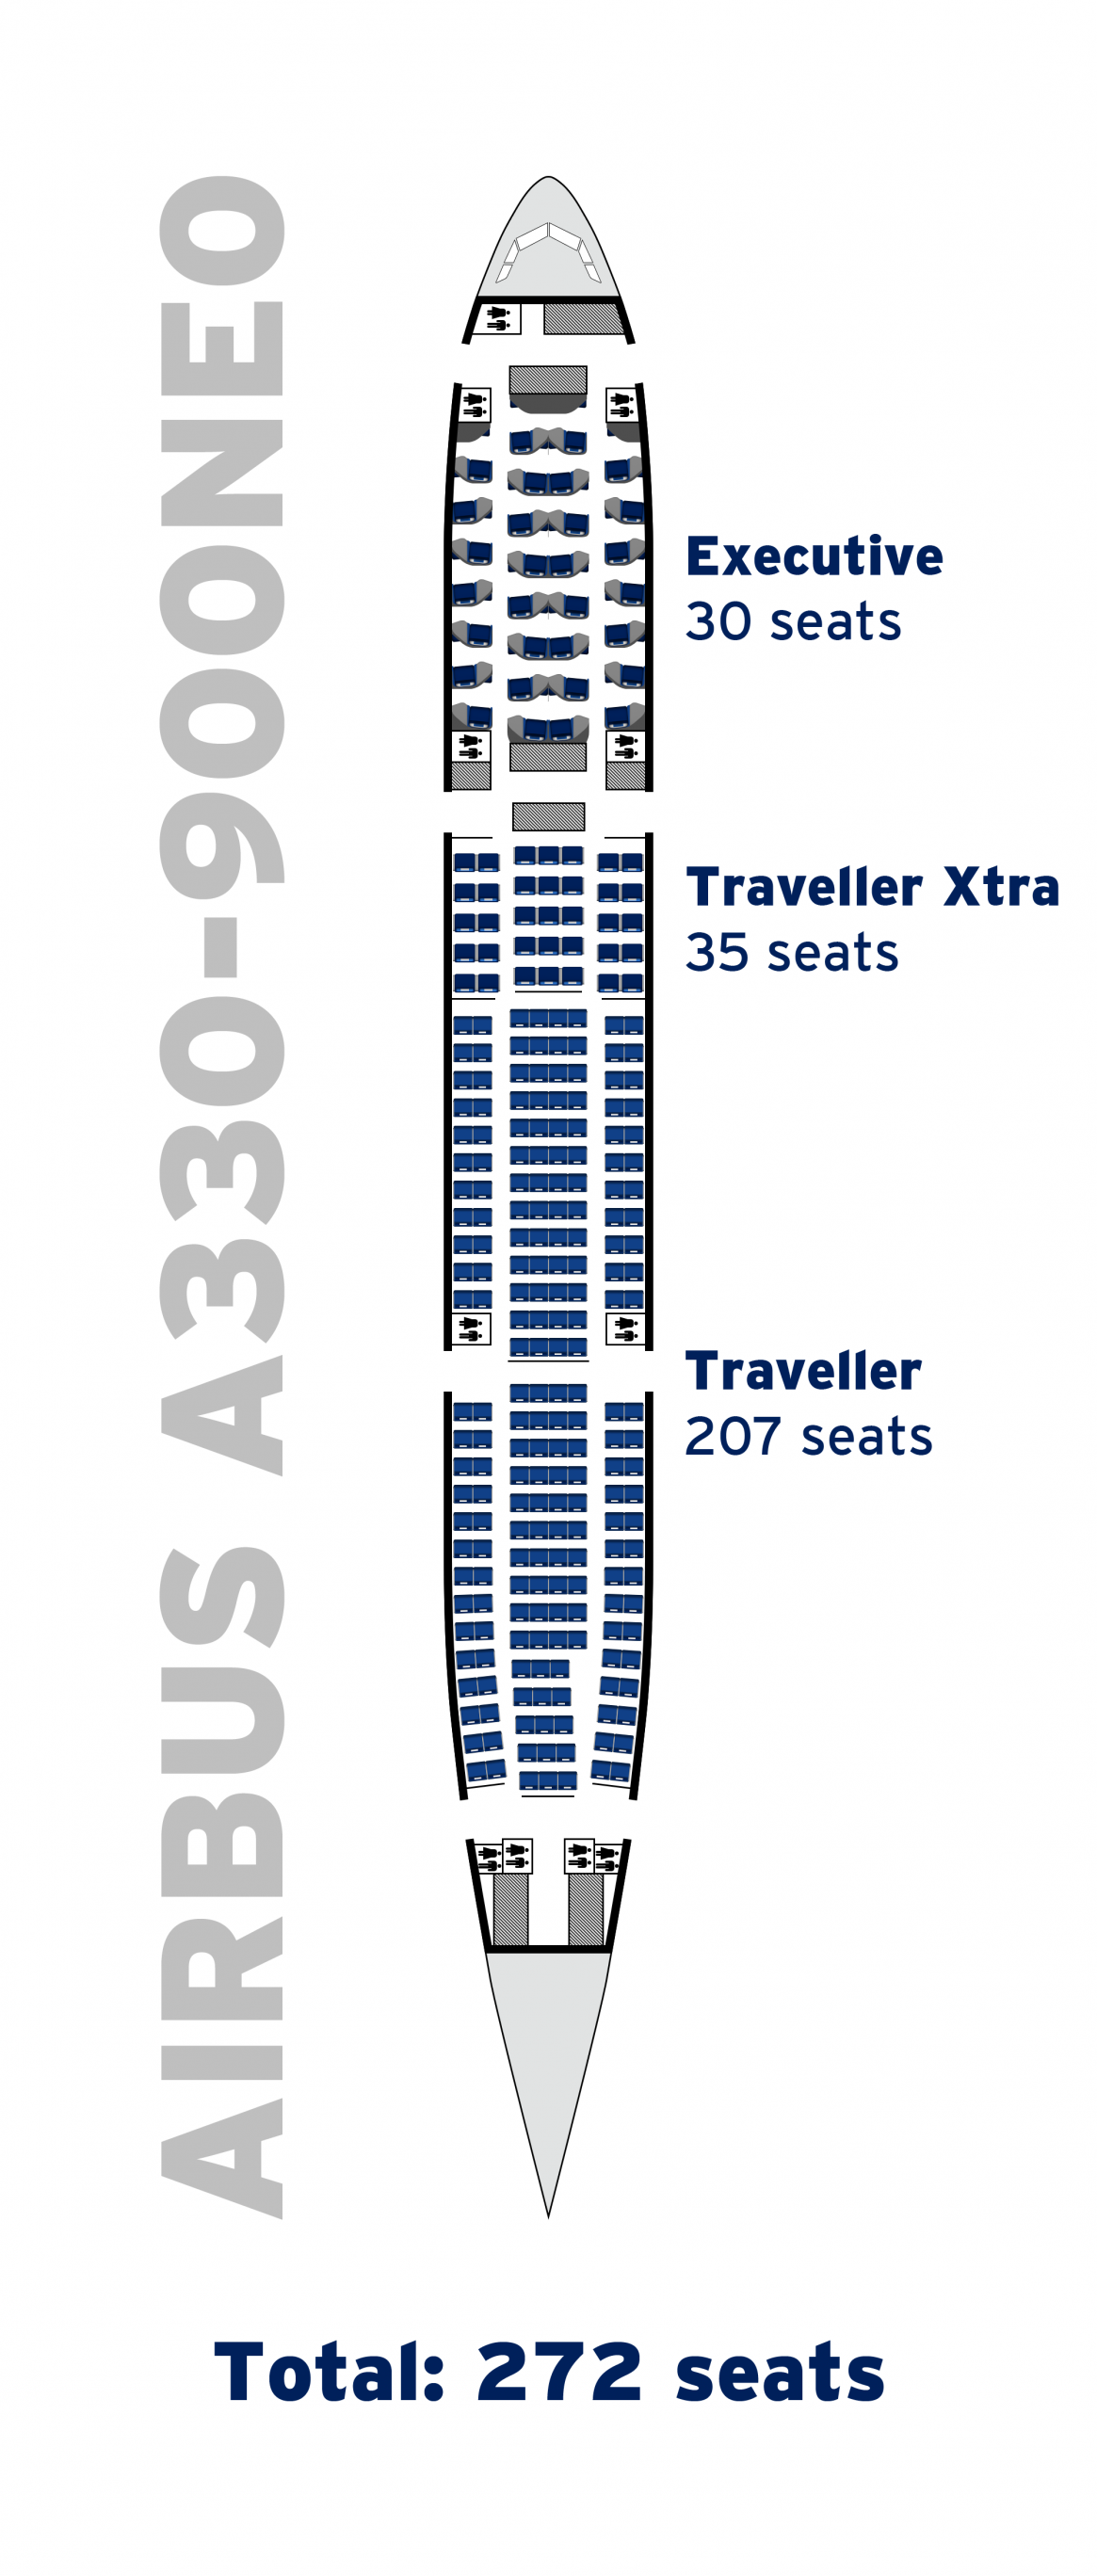 Seat Map For Airbus A330 900neo - Image to u